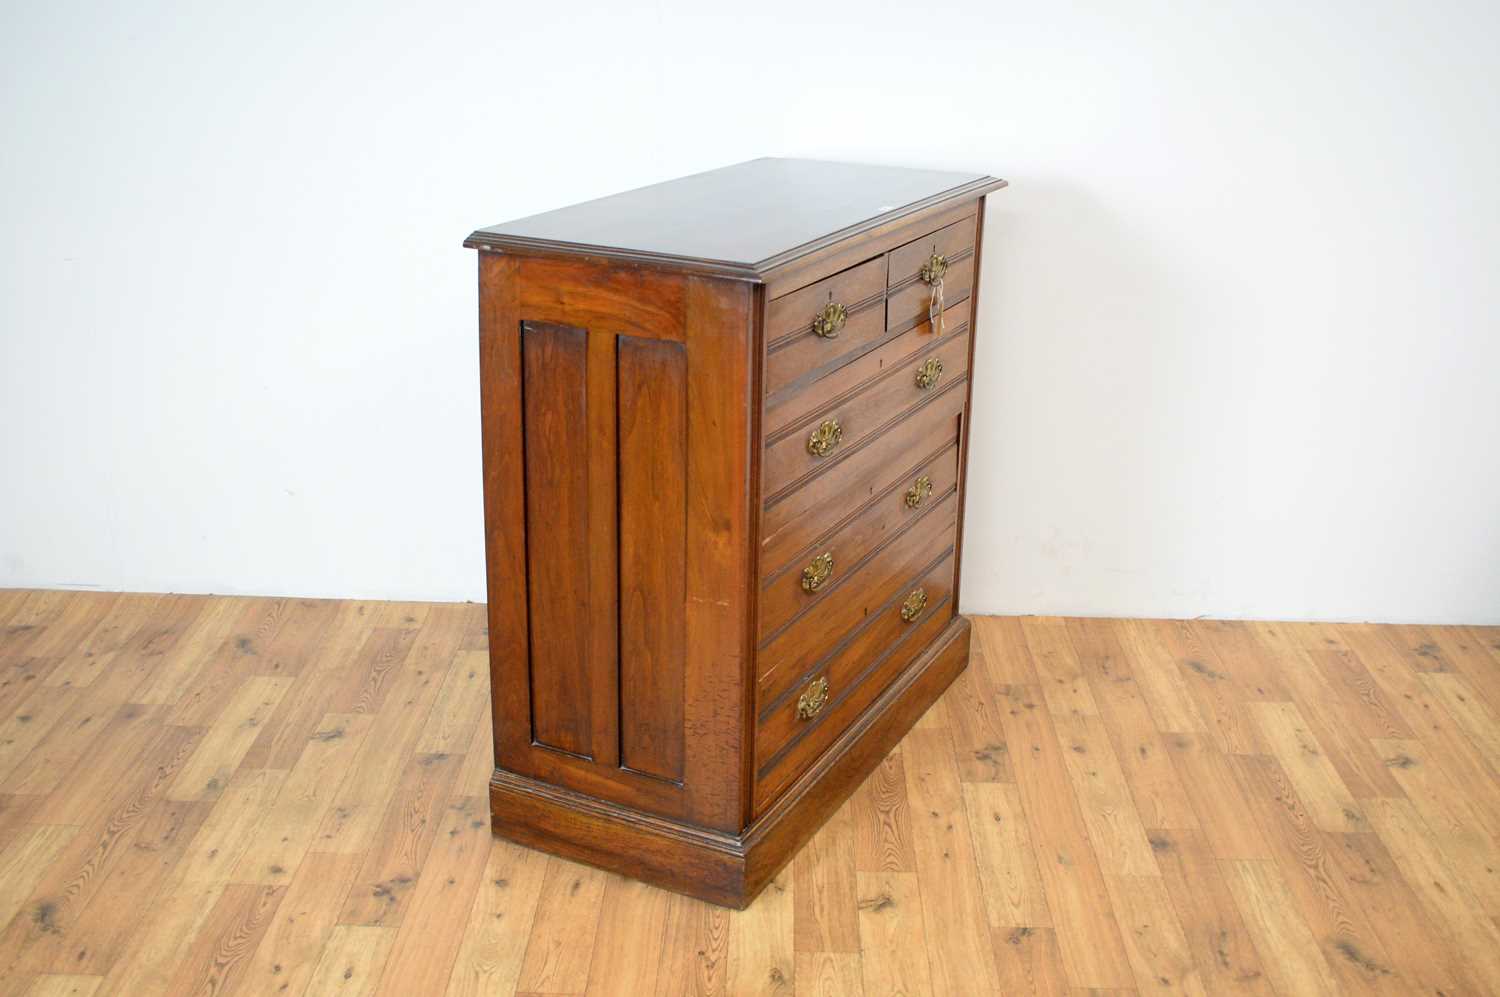 An Edwardian walnut chest of drawers - Image 3 of 4